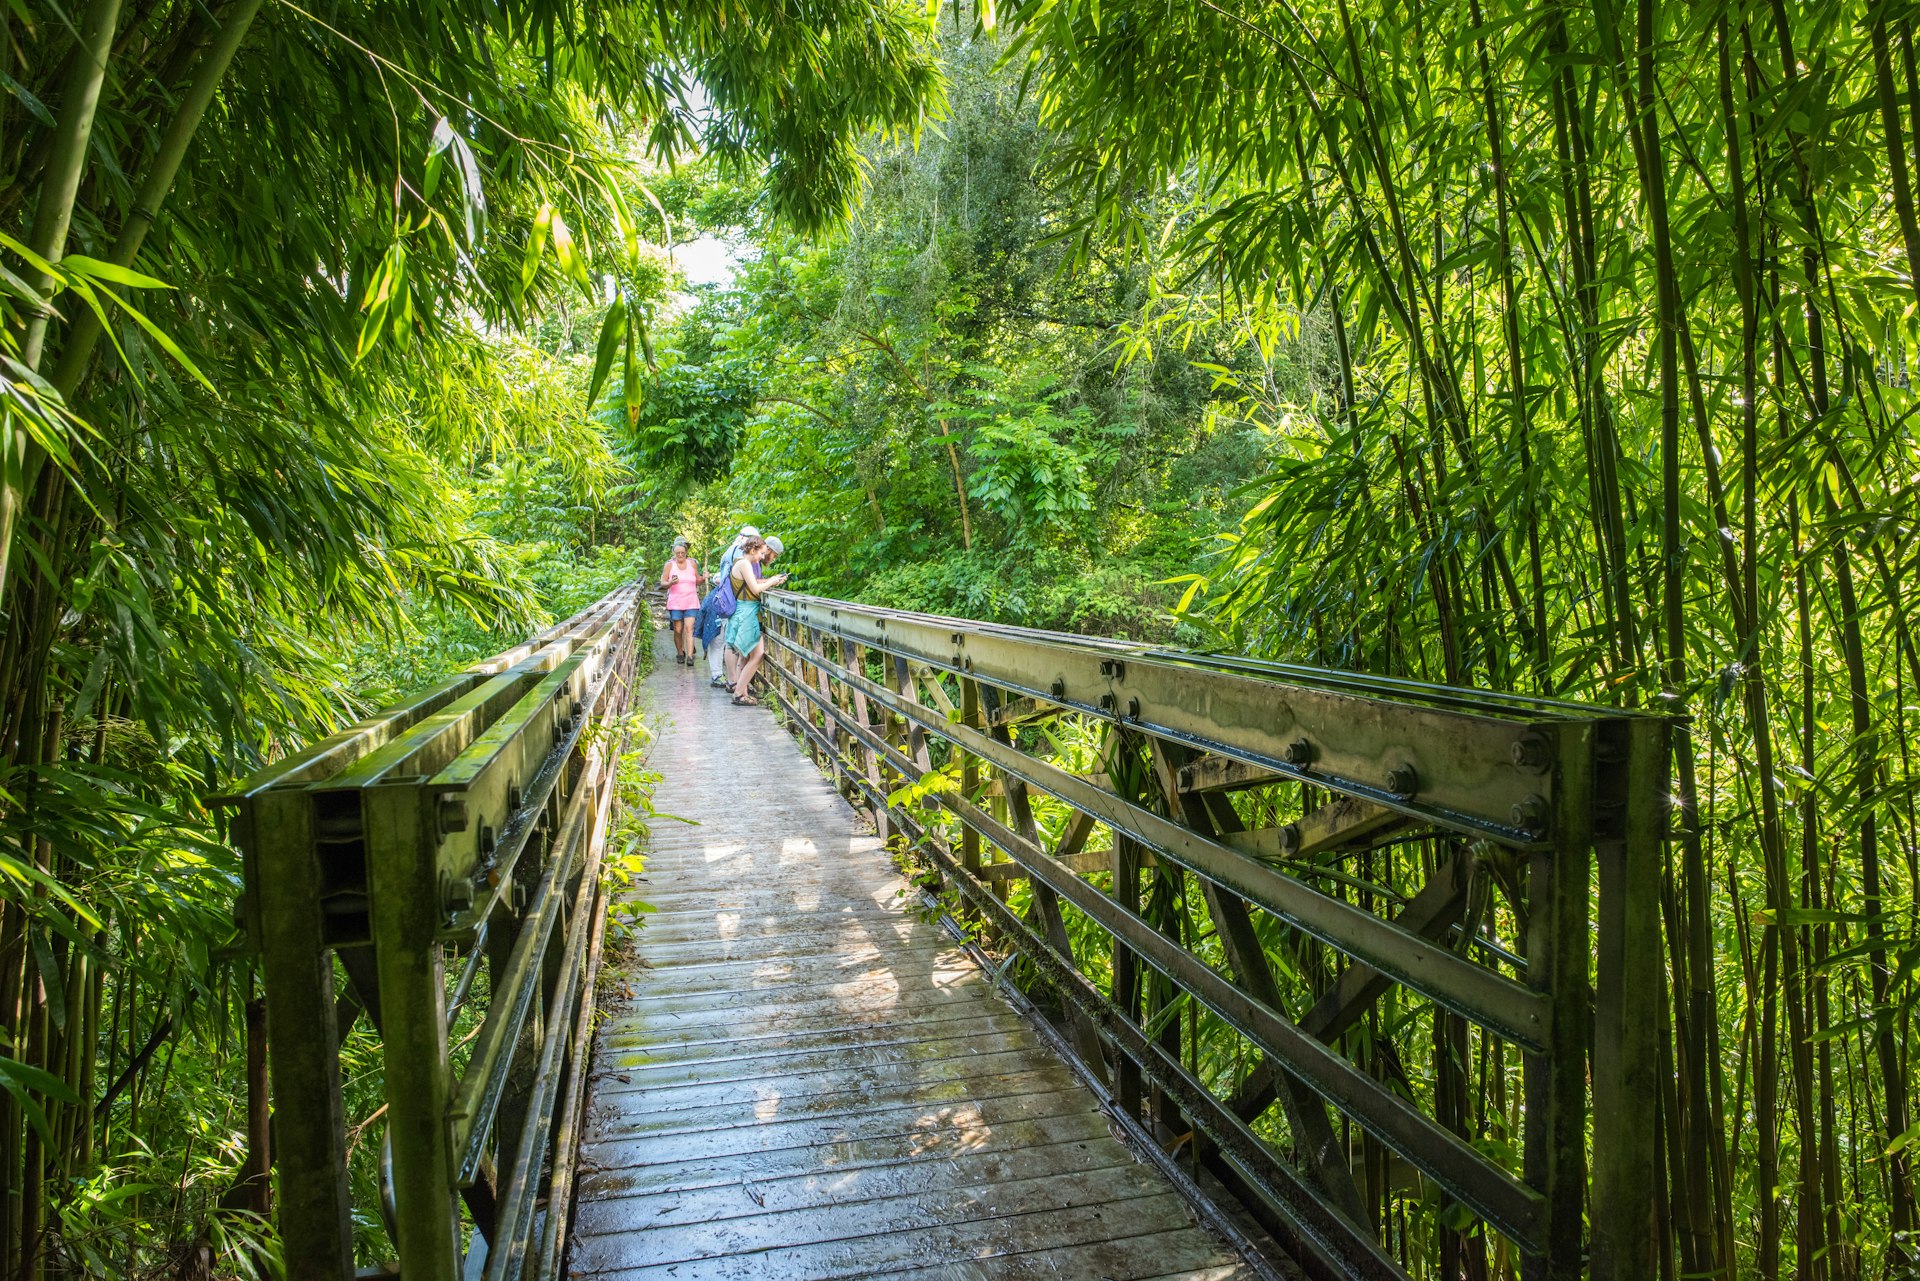 People stand on a boardwalk through dense bamboo forest, with green shoots reaching skyward all around them